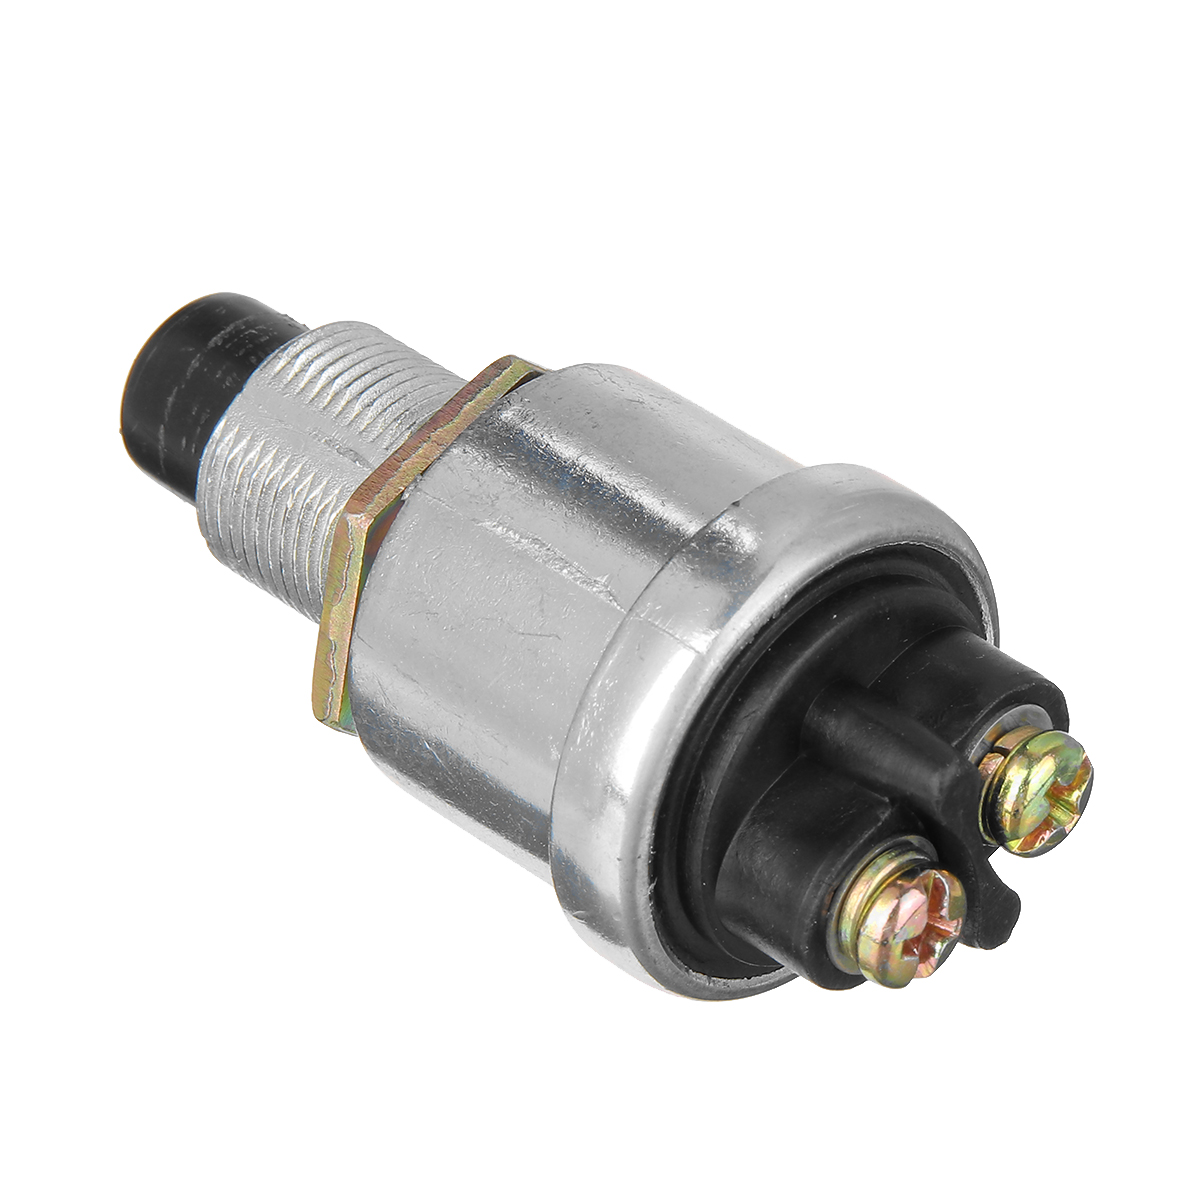 12V 50Amps Heavy-Duty Momentary Push-Button Engine Starter Switch for Car Van Lorry Boat Dashboard Panels